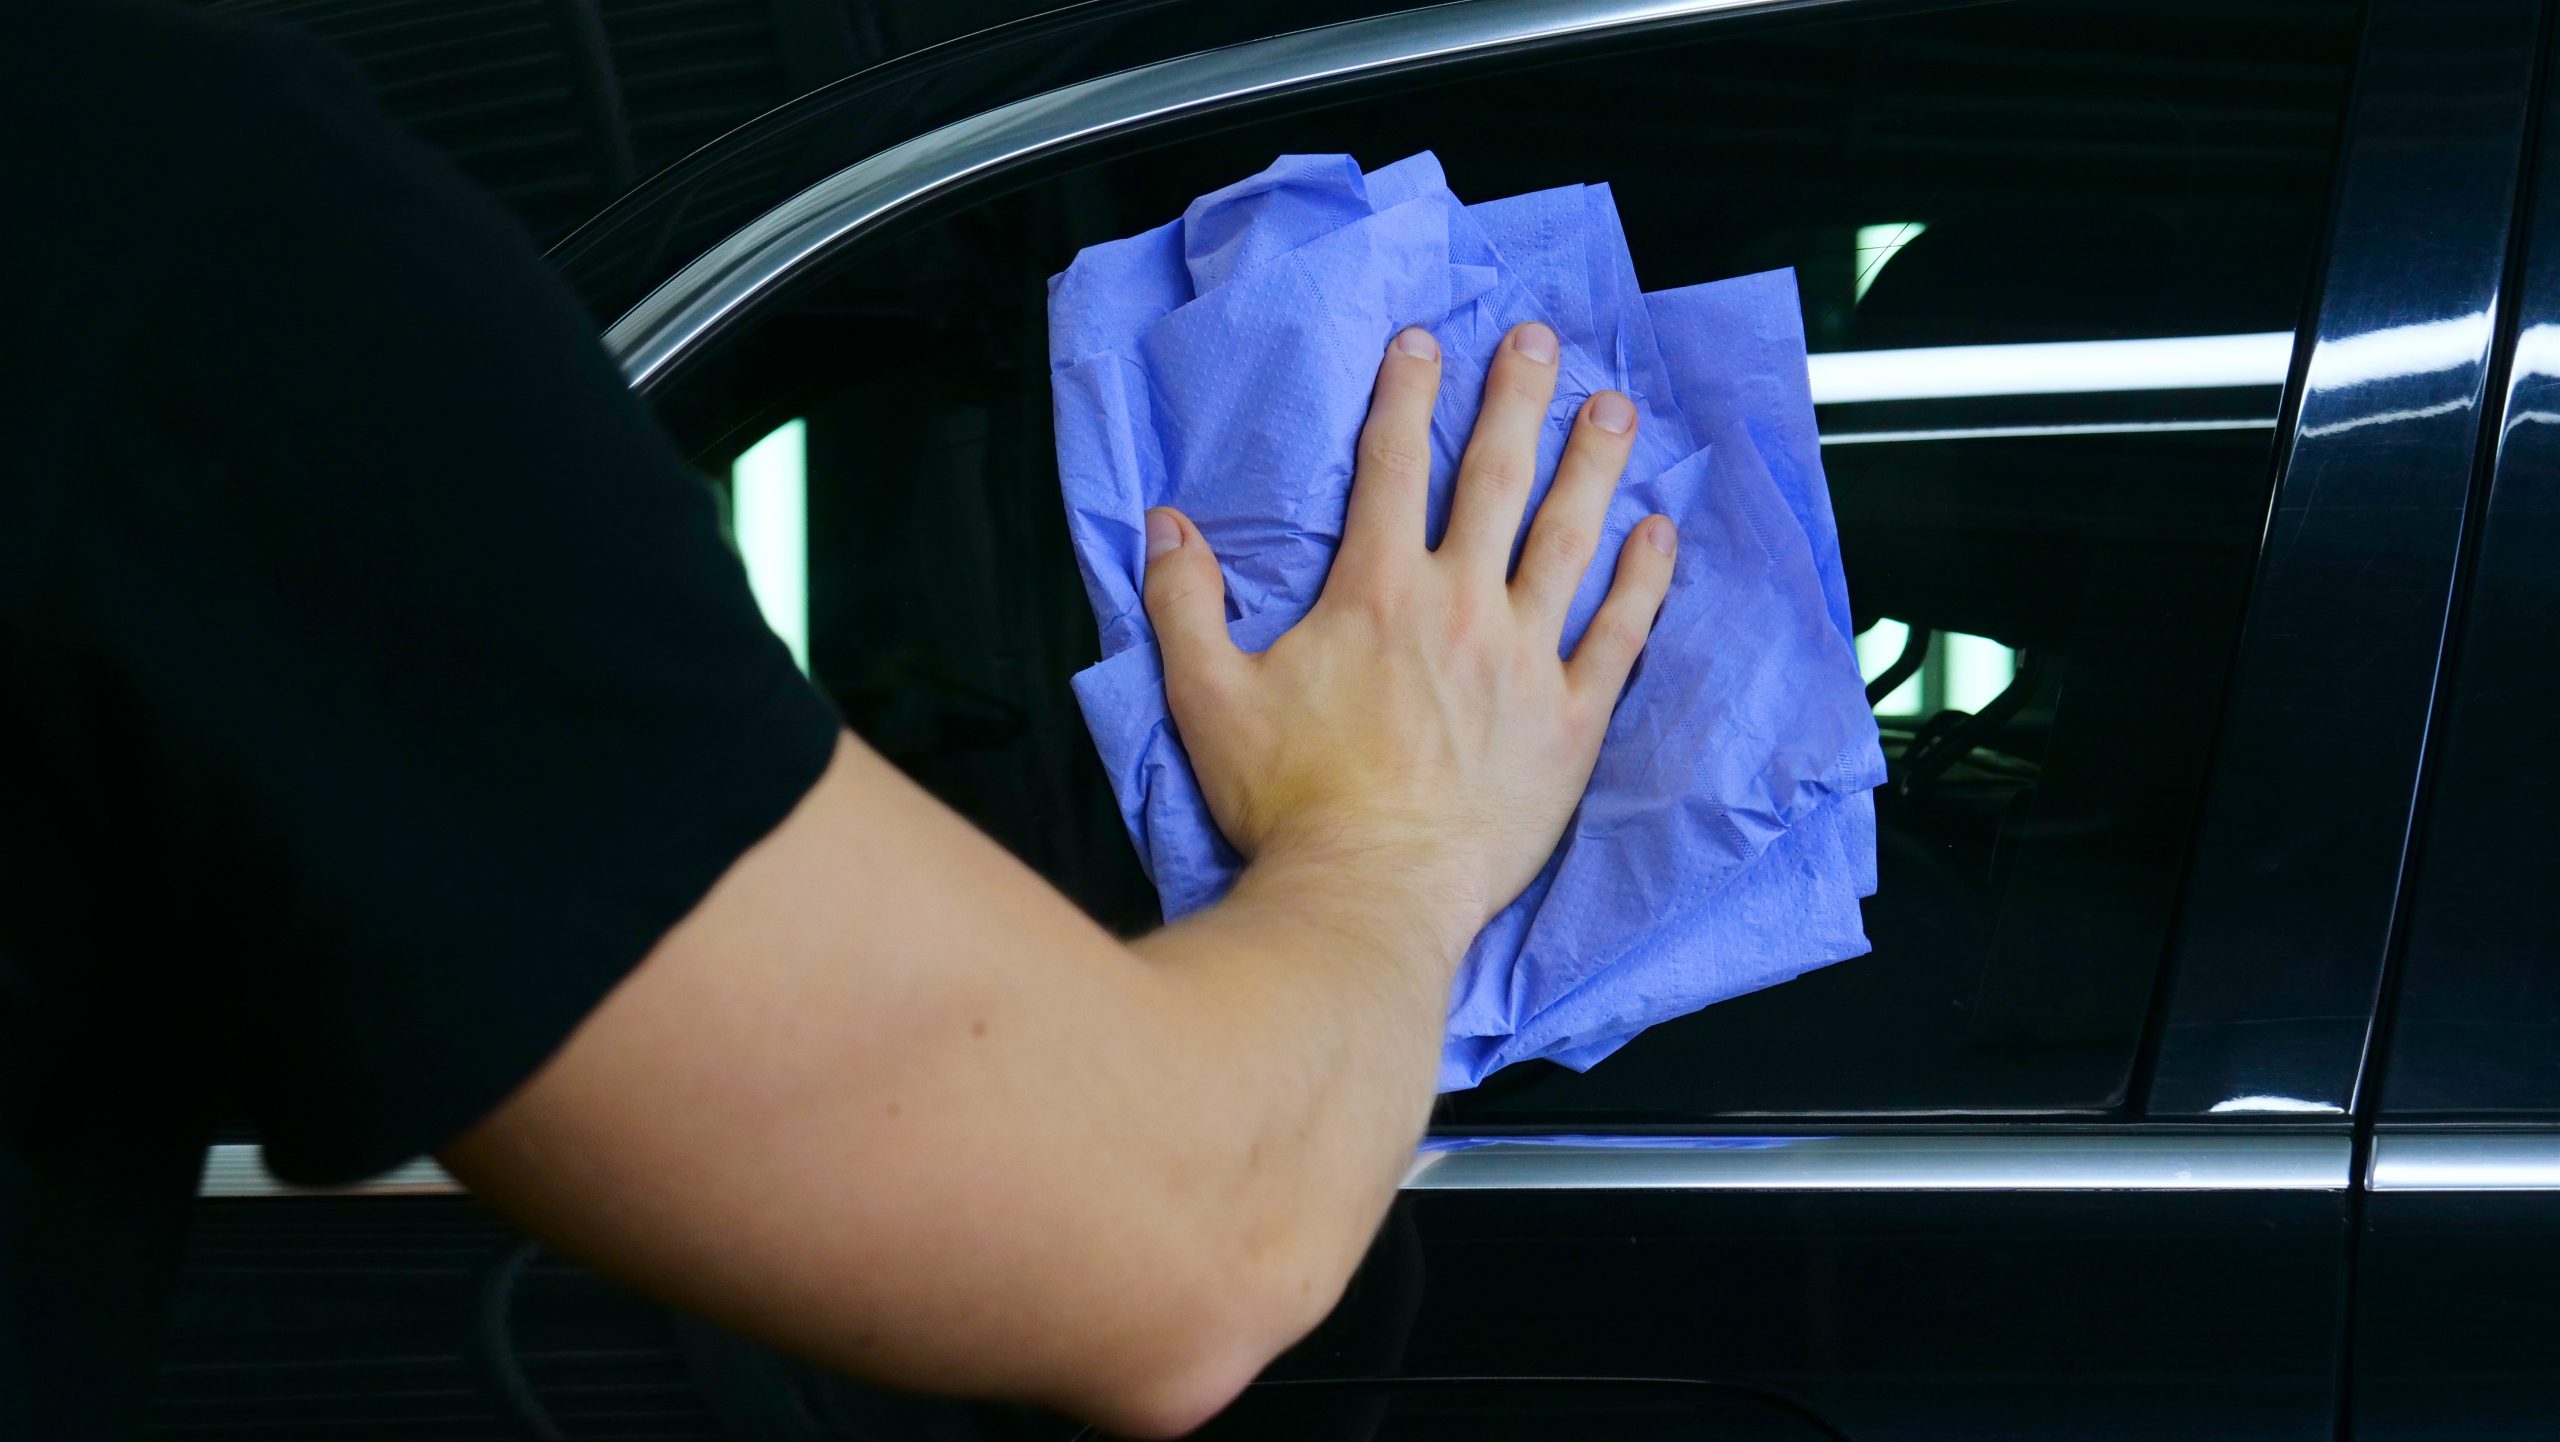 Professional car washer wipes and dries window after car washing